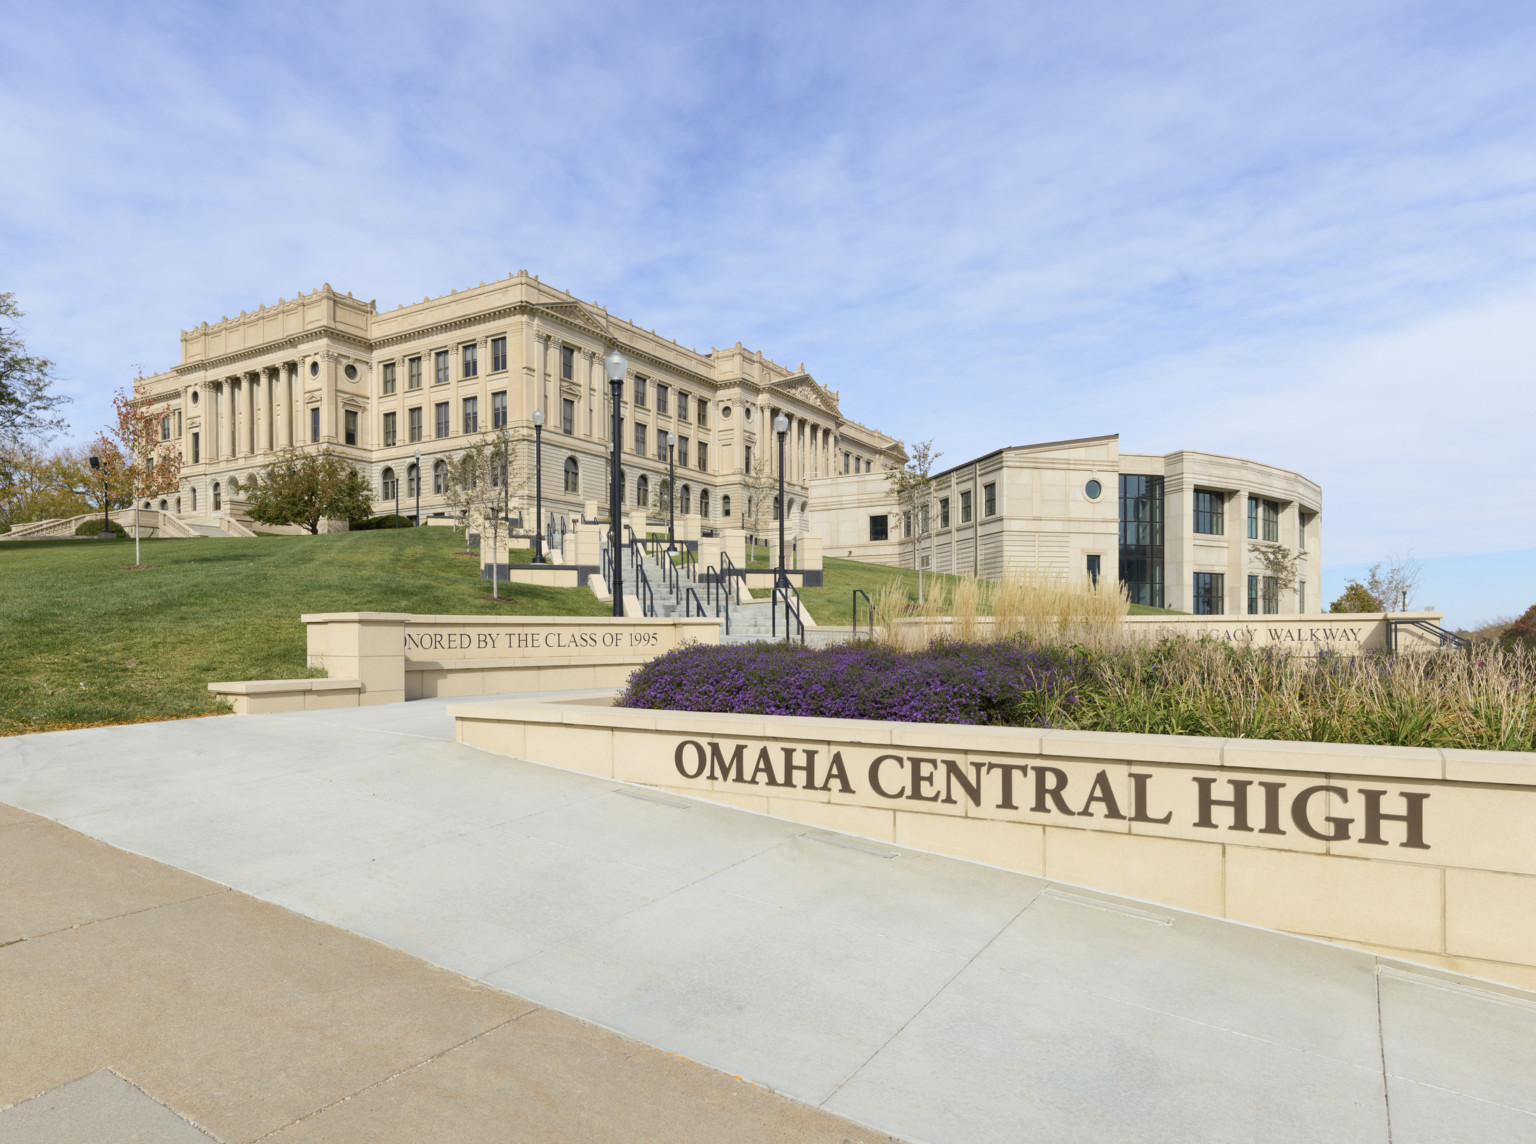 Exterior view of Omaha Central High School, a large 3 story beige stone building with new addition. Garden, front, behind sign